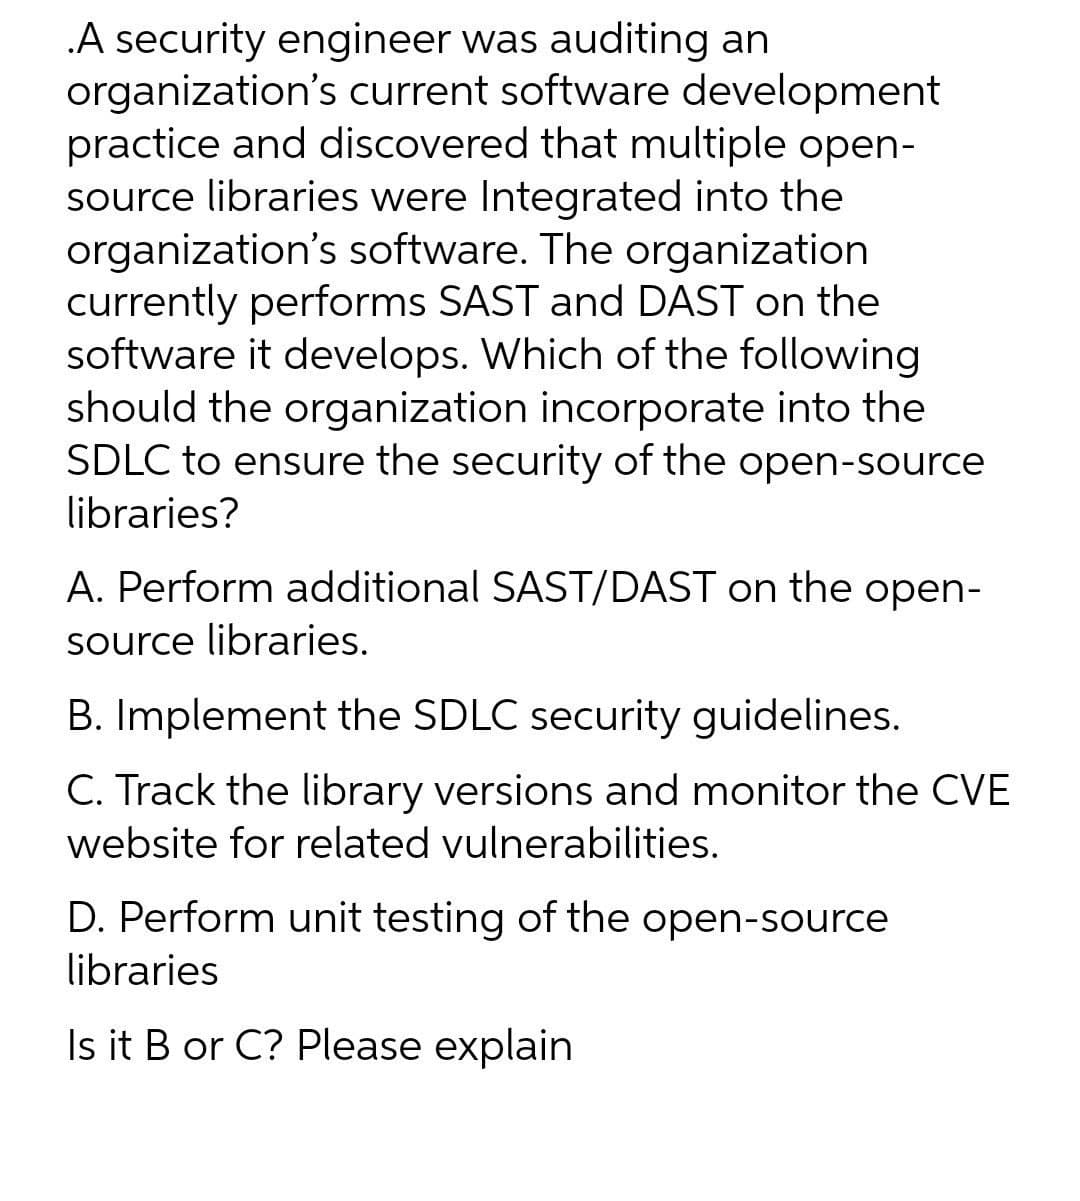 .A security engineer was auditing an
organization's current software development
practice and discovered that multiple open-
source libraries were Integrated into the
organization's software. The organization
currently performs SAST and DAST on the
software it develops. Which of the following
should the organization incorporate into the
SDLC to ensure the security of the open-source
libraries?
A. Perform additional SAST/DAST on the open-
source libraries.
B. Implement the SDLC security guidelines.
C. Track the library versions and monitor the CVE
website for related vulnerabilities.
D. Perform unit testing of the open-source
libraries
Is it B or C? Please explain
